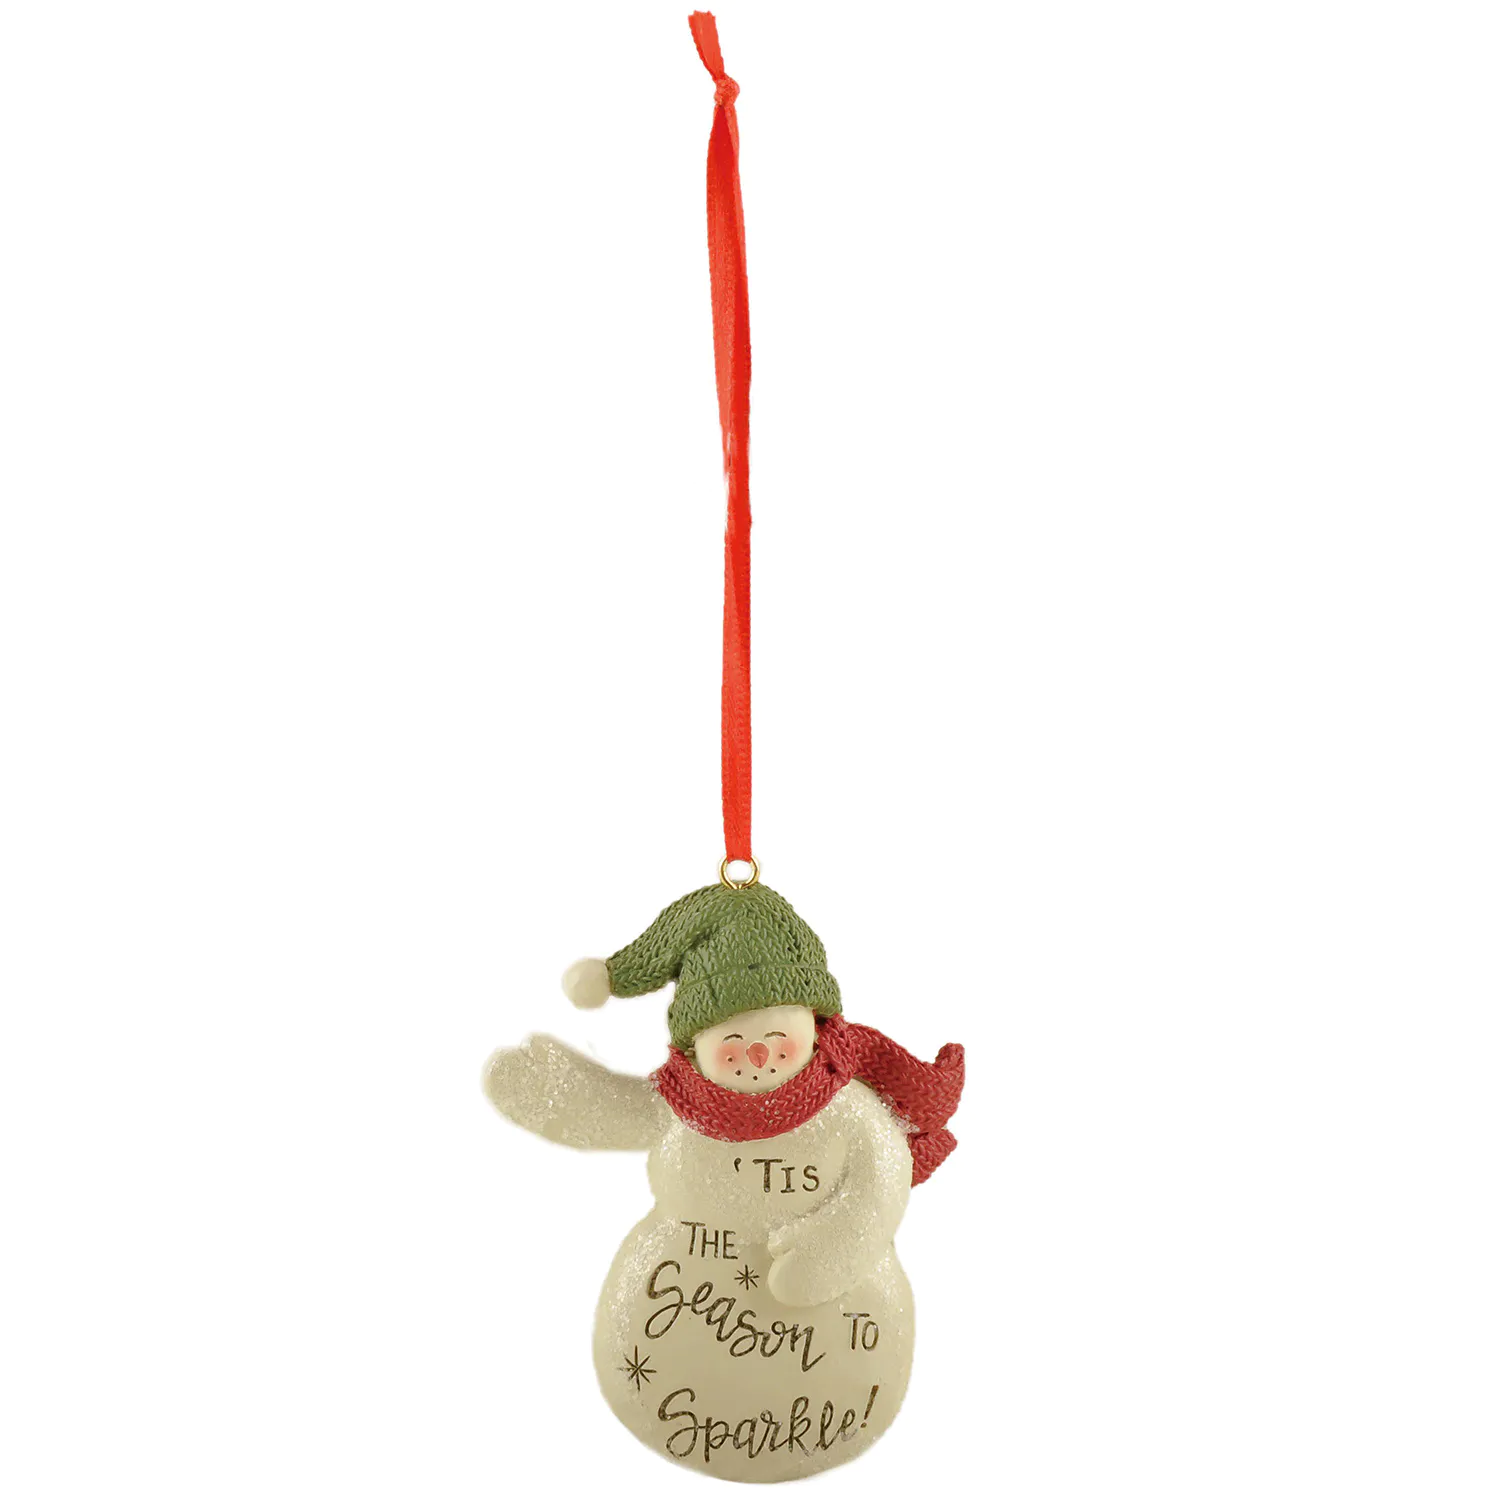 Handcrafted Holiday Charm Glistening Handmade Resin Snowman with Cozy Green Hat, Bringing Handmade Sparkle to Your Christmas Decor 238-52135